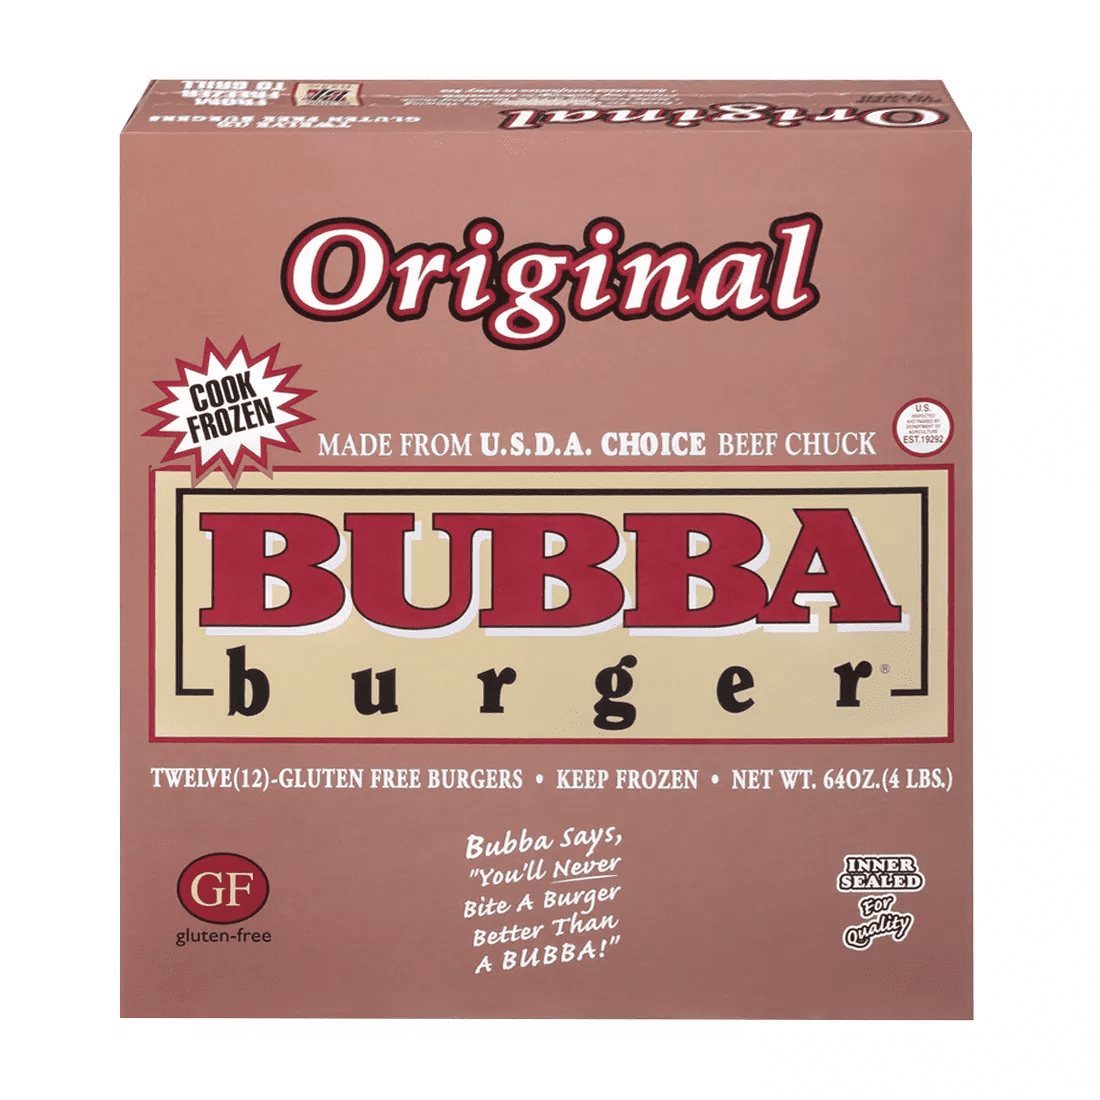 How to cook bubble burgers?